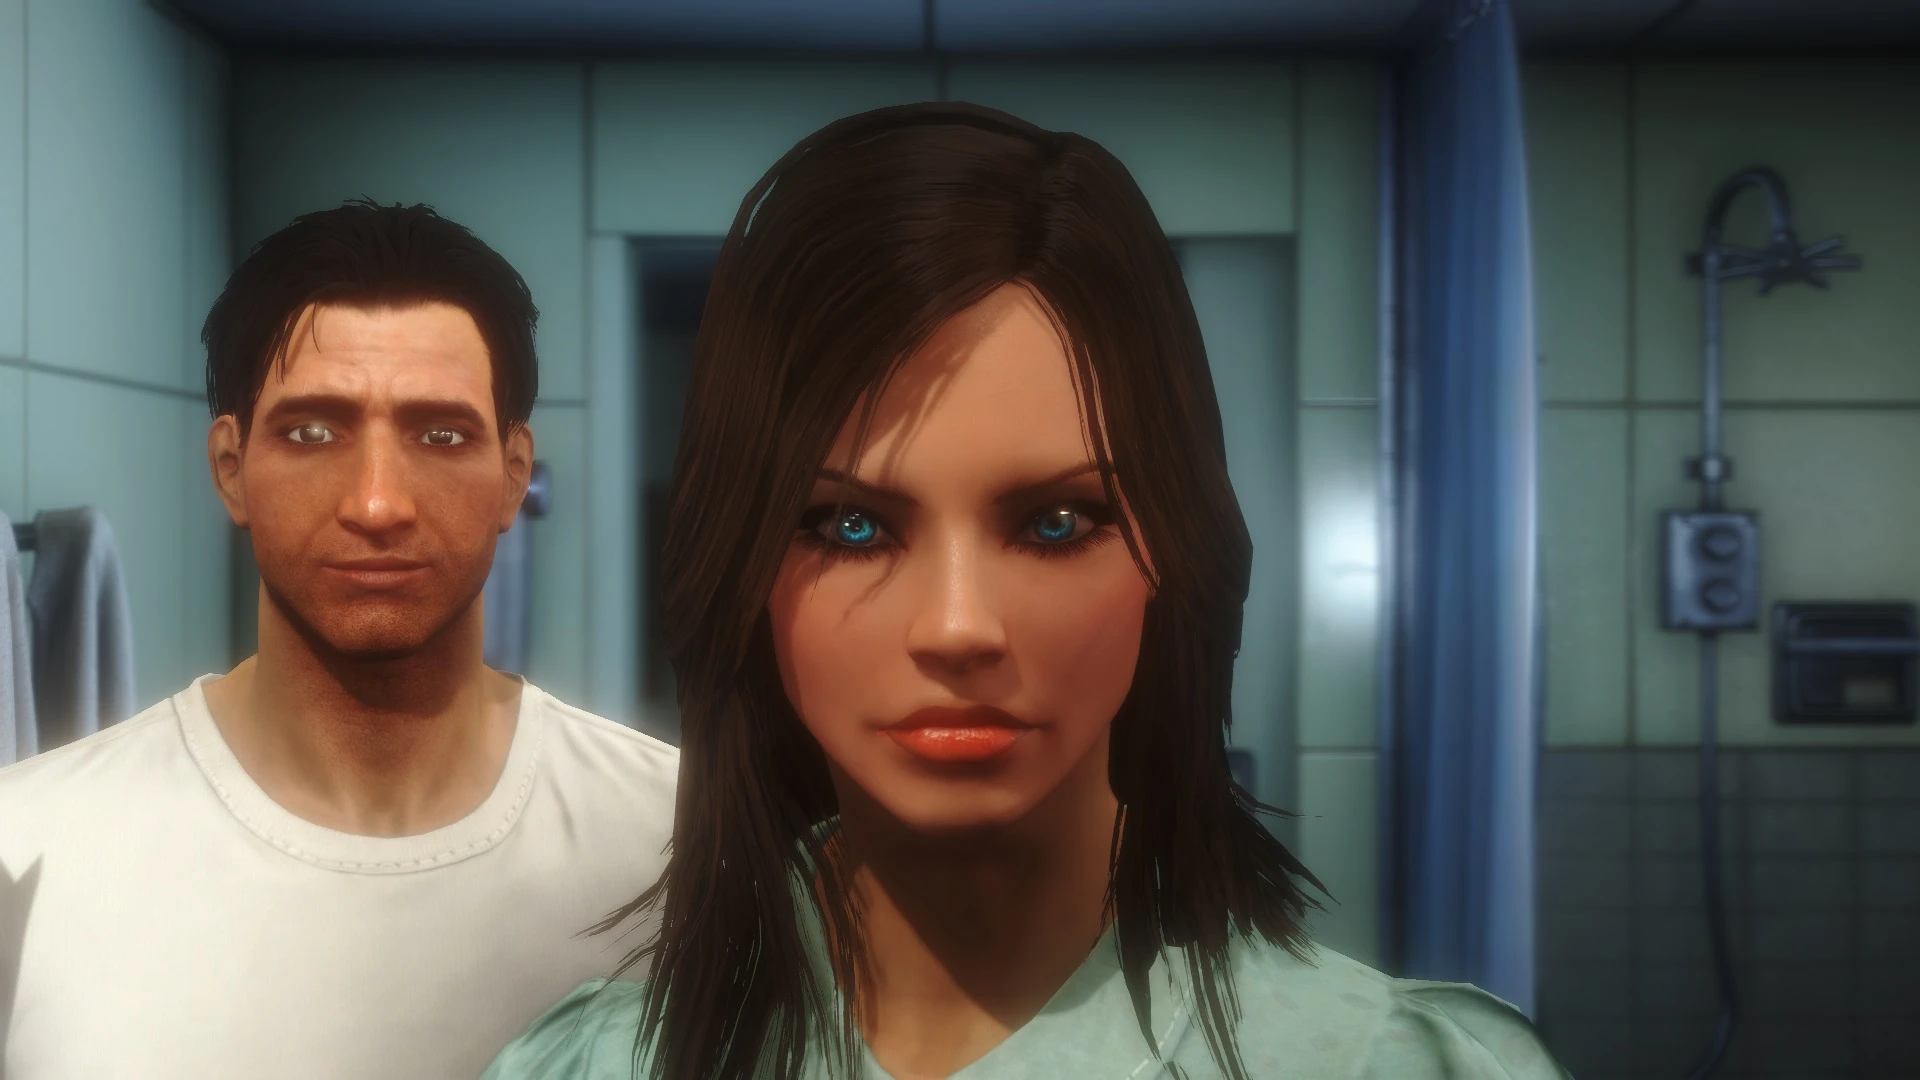 fallout 4 save character face